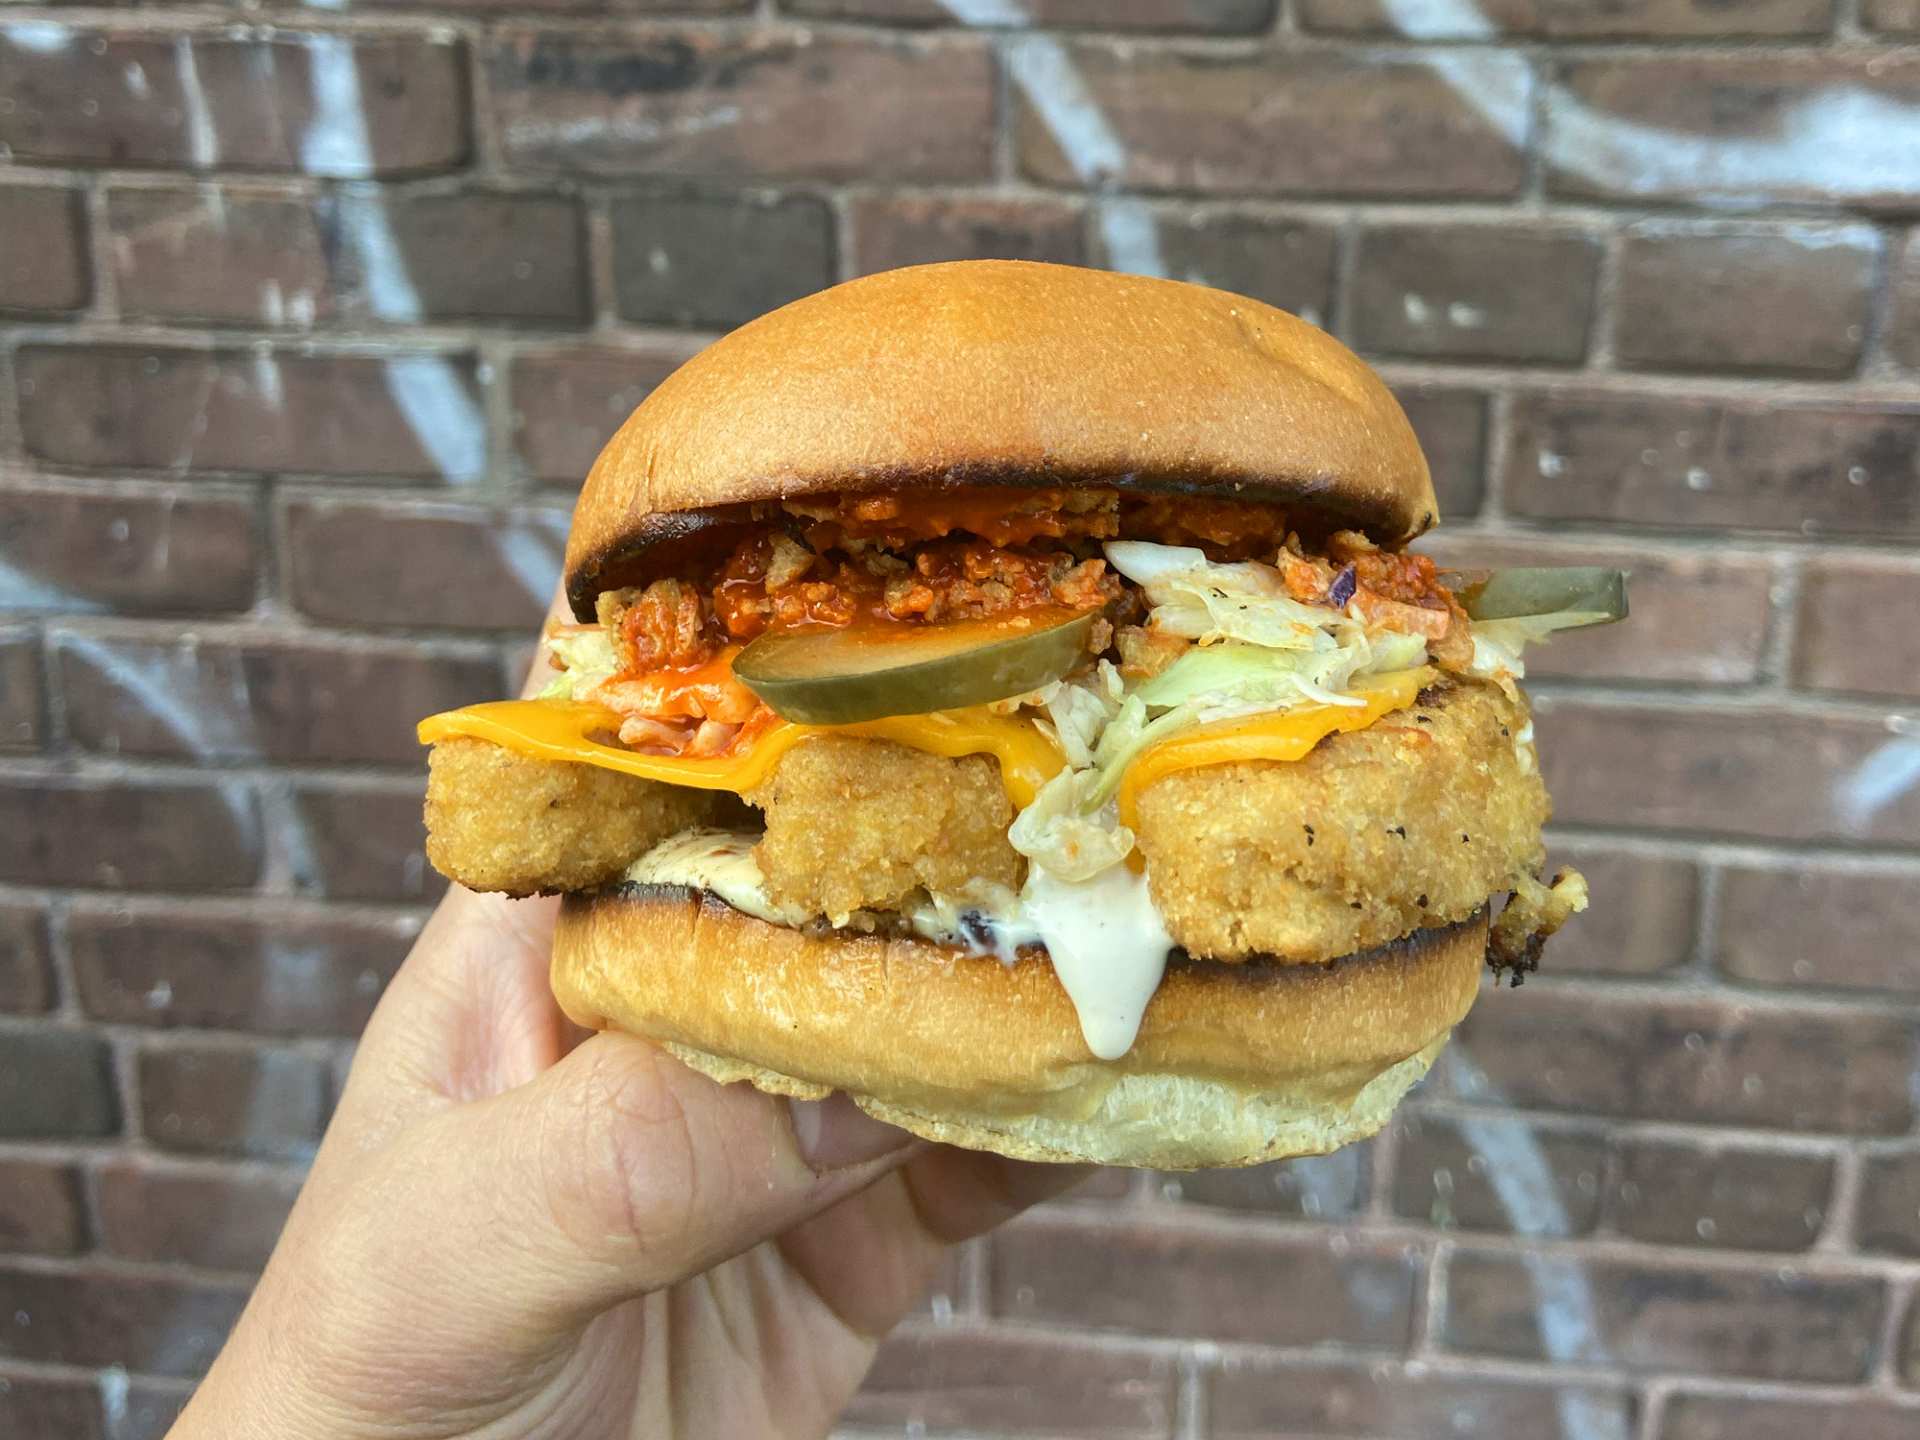 Best vegan restaurants in Toronto | A sandwich at Guerilla Burger with pickles and vegan breaded fillets